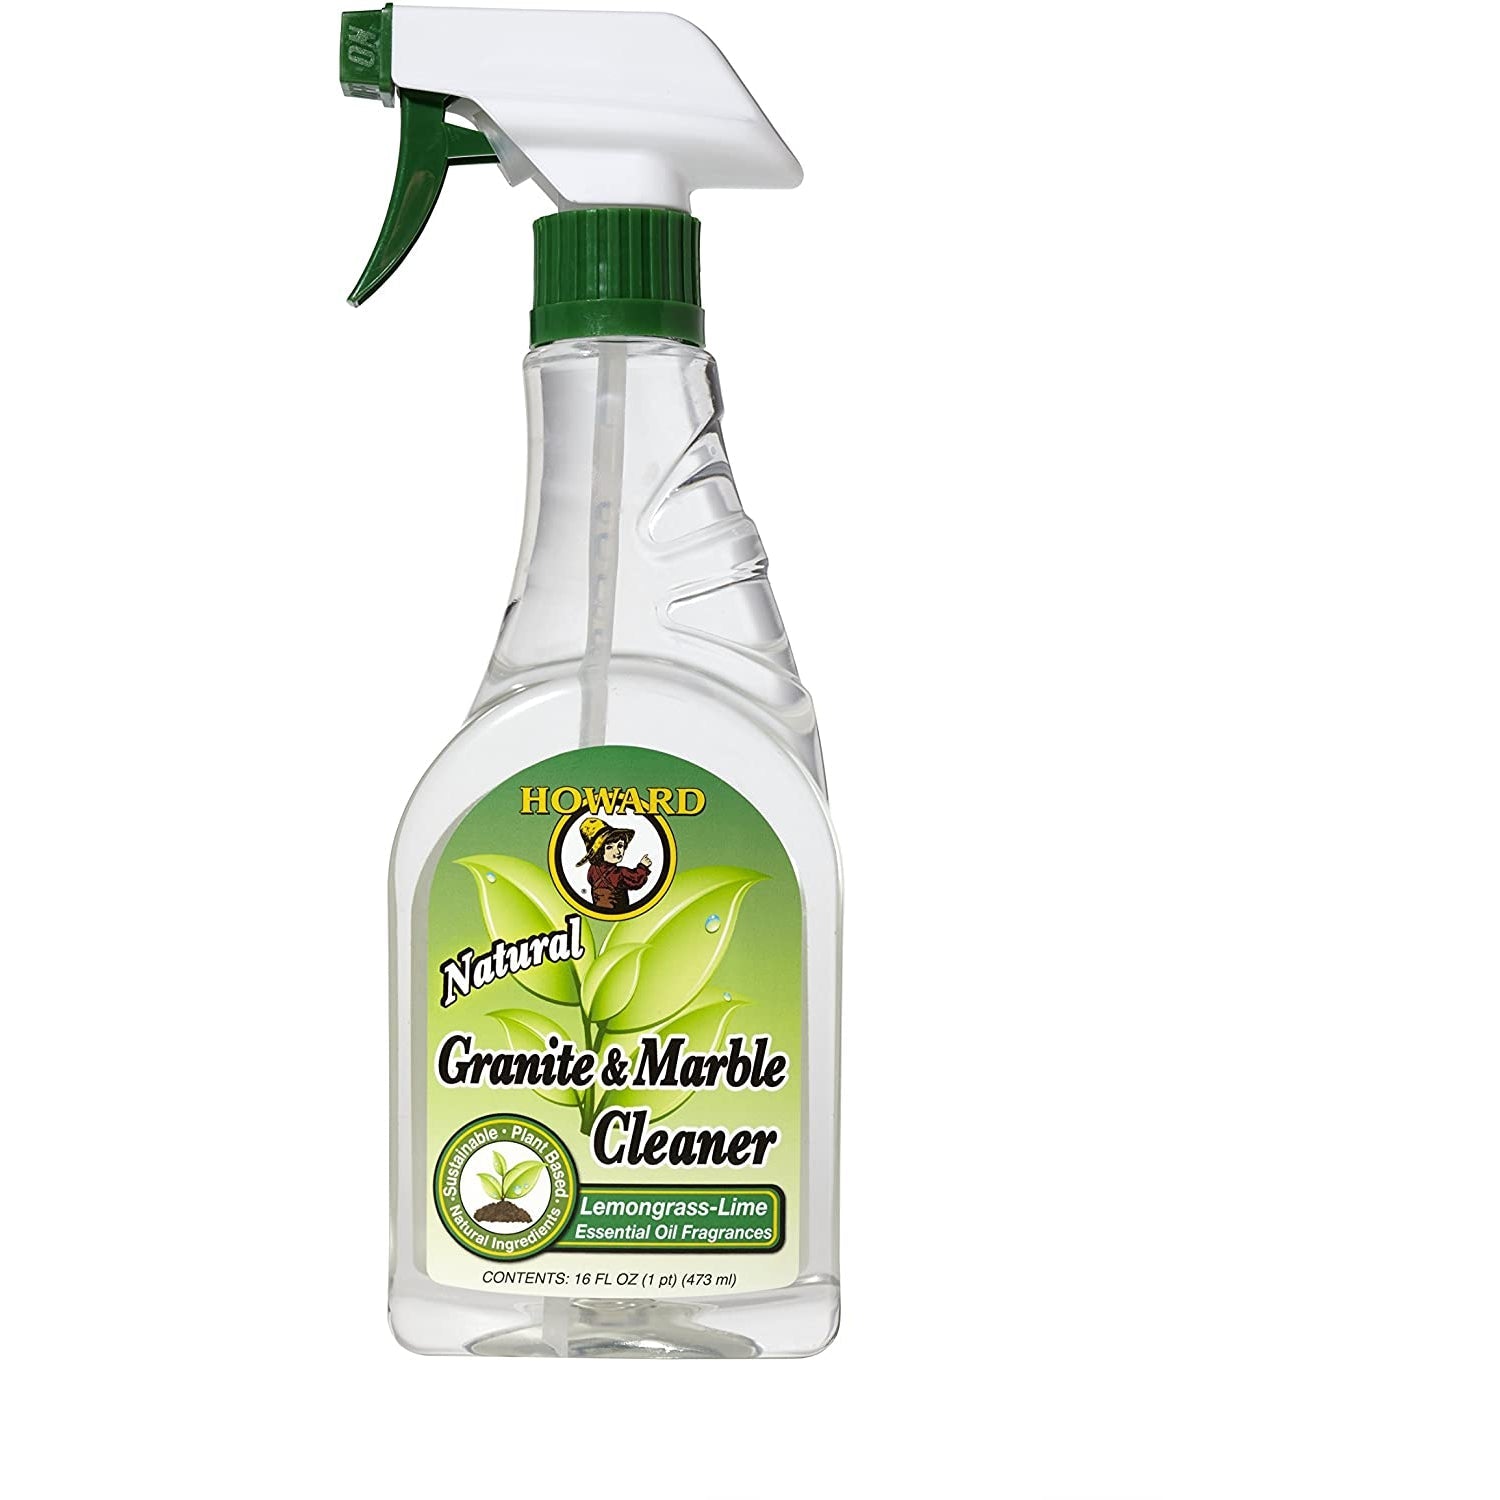 Howard GM5012 Natural Granite and Marble Cleaner, 16-Ounce, Lemongrass-Lime - The Paint People